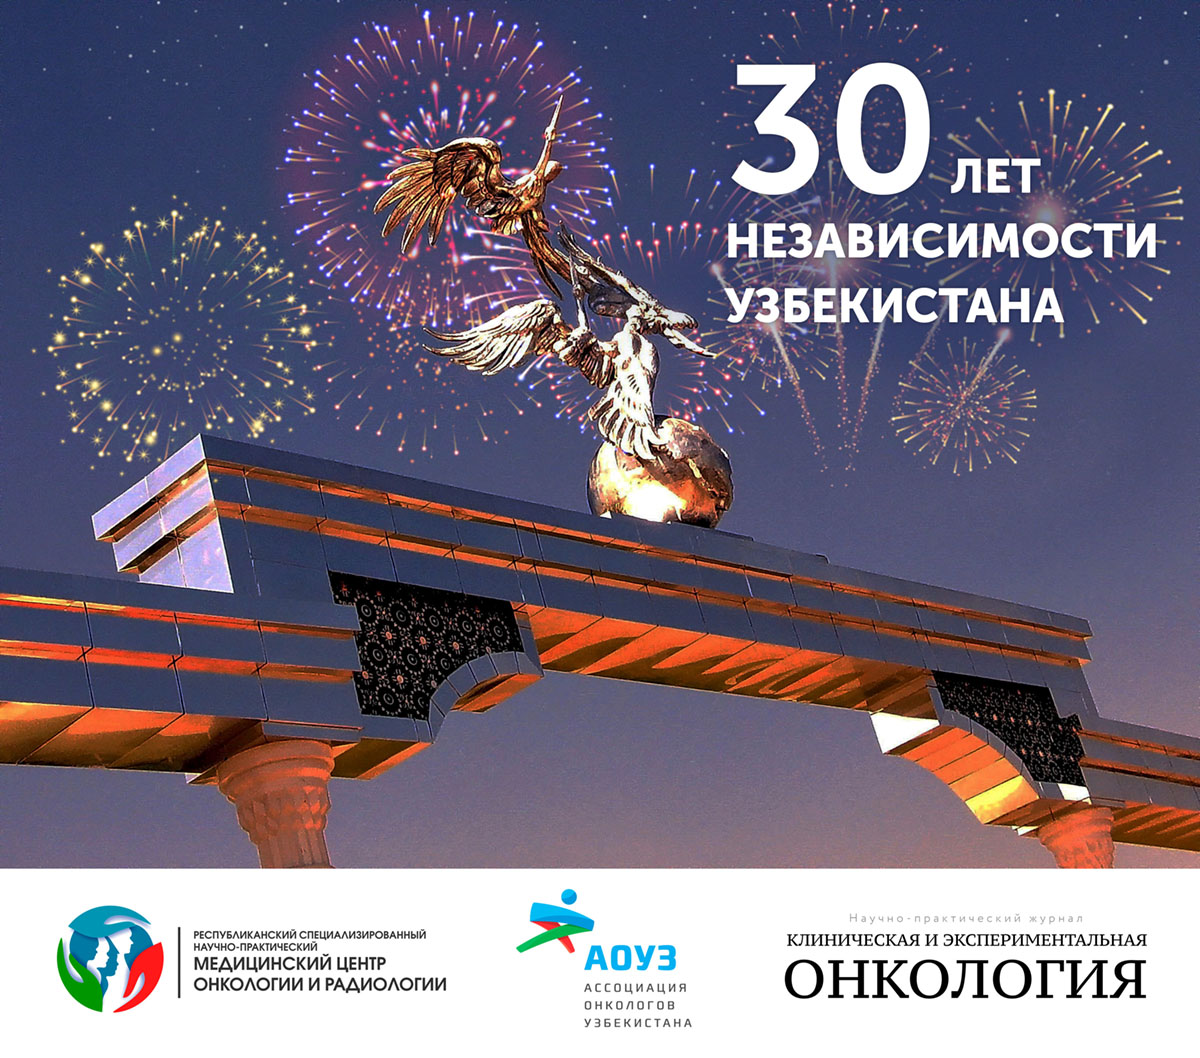 30th Independence Day of the Republic of Uzbekistan